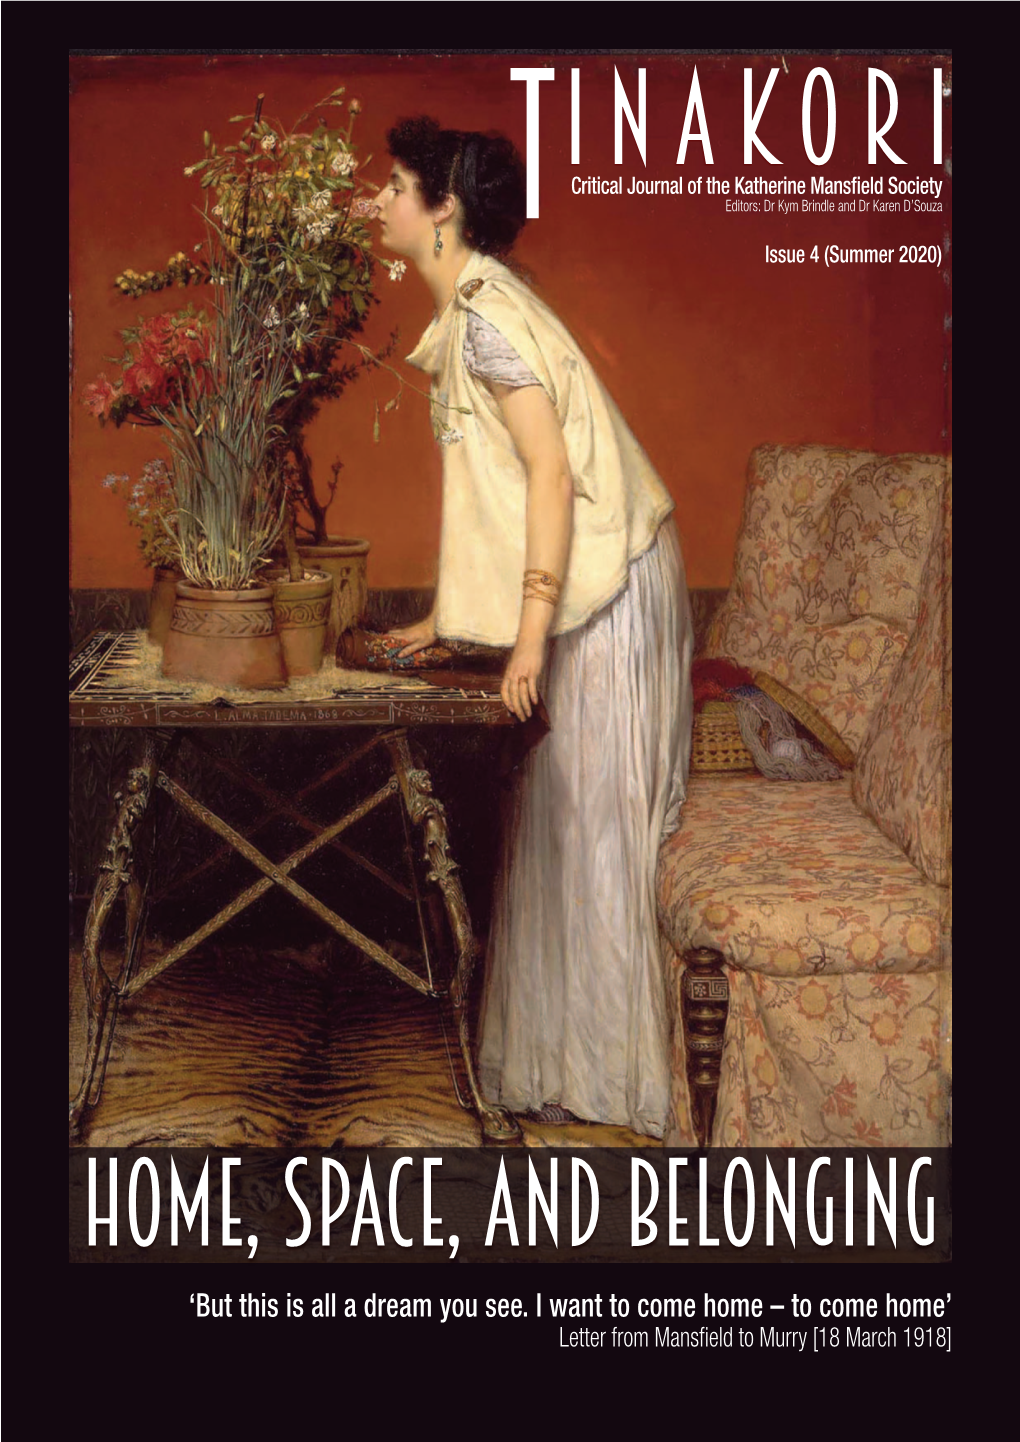 Home, Space, and Belonging